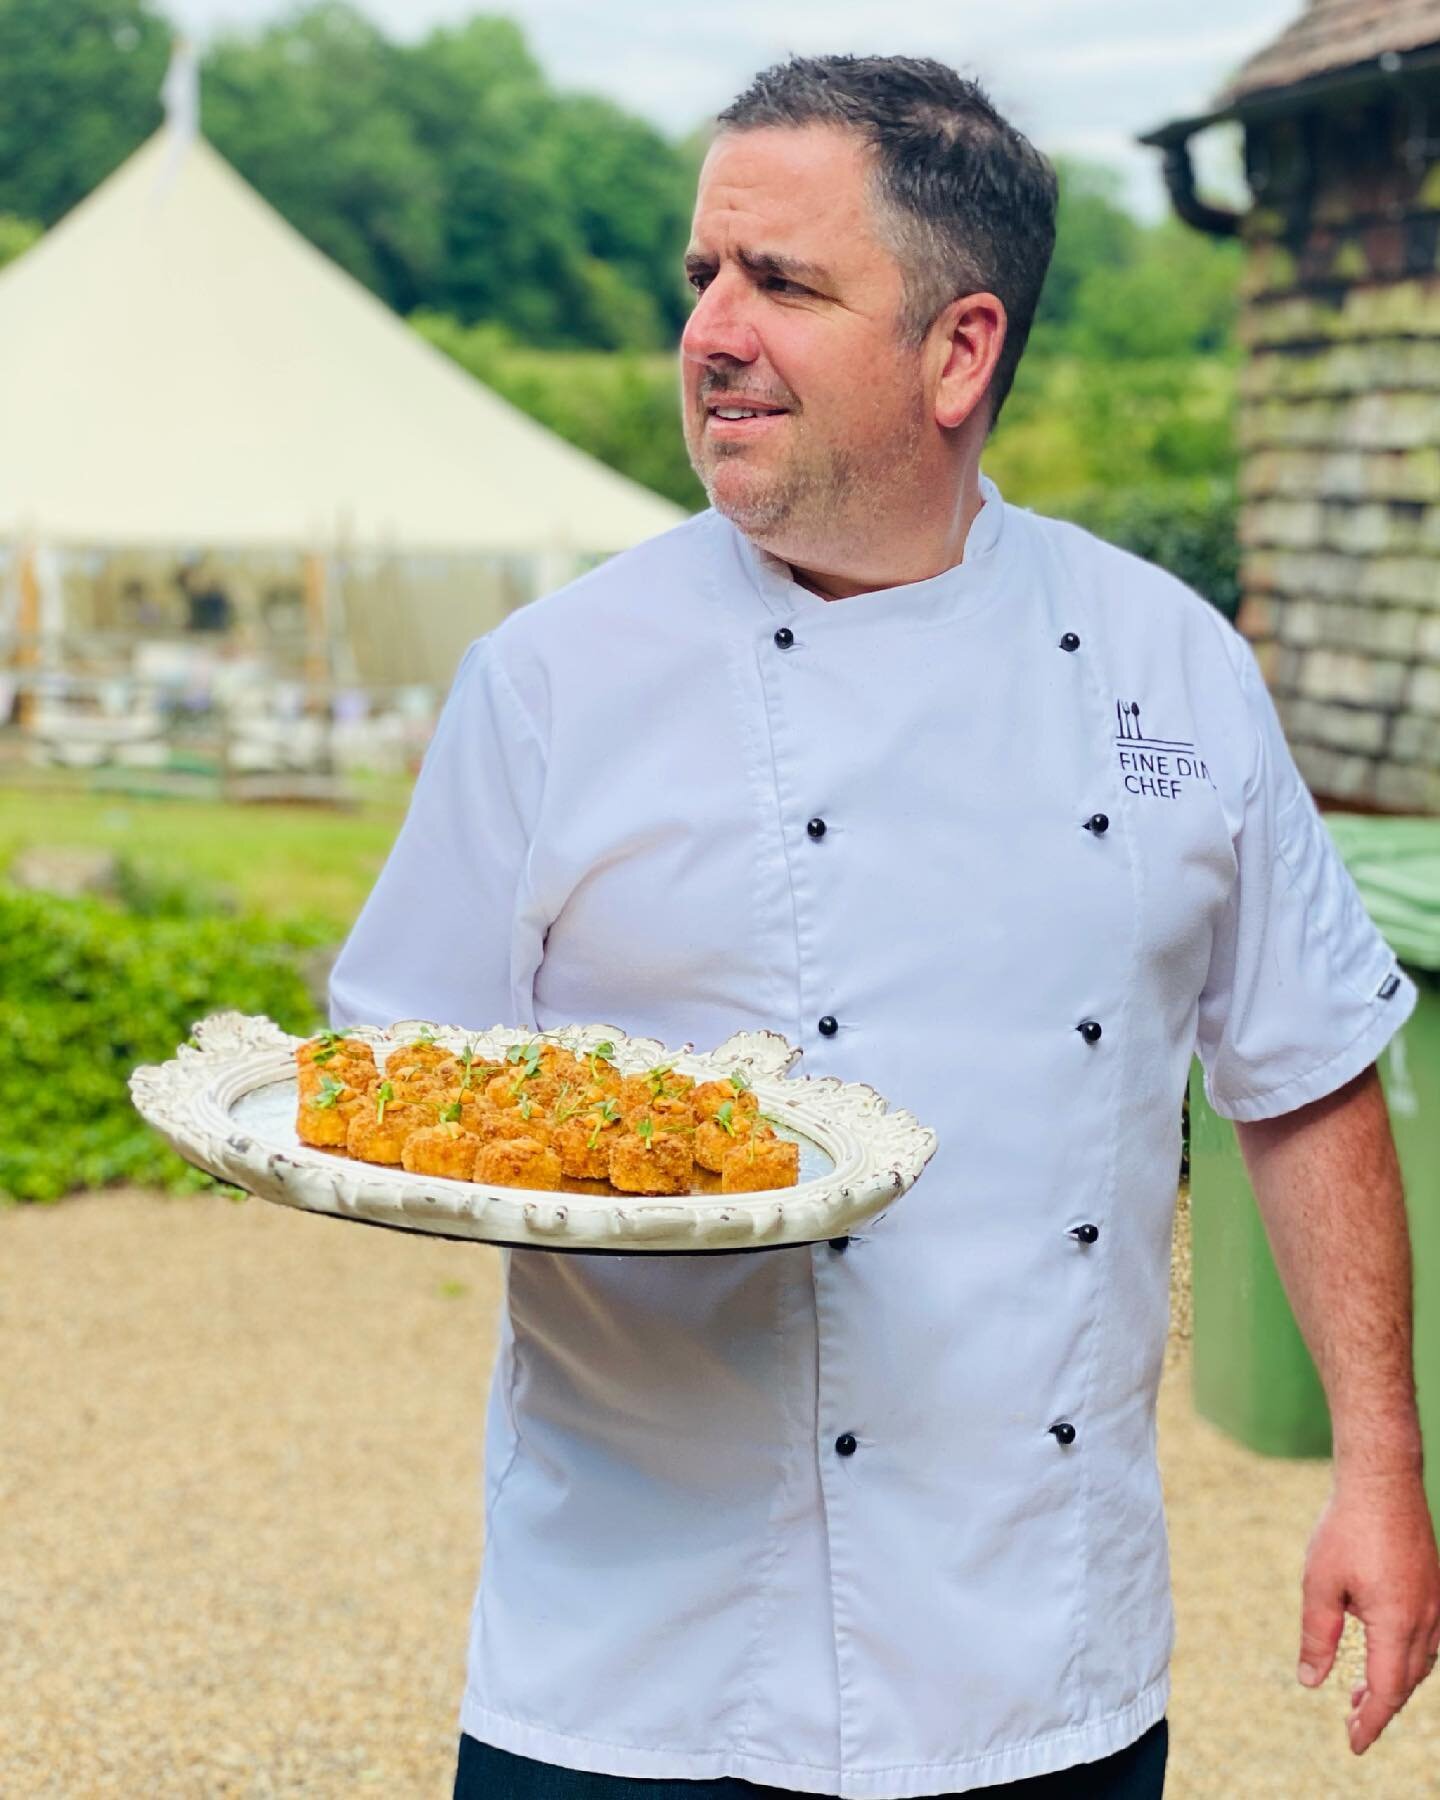 Our Chef Director Carl in action last week. 

New restrictions mean we cannot serve canap&eacute;s in our usual way but as ever the FDC team raised their game &amp; made sure the wedding went smoothly &amp; everyone had an amazing time. 

𝒯𝒽𝑒 𝓉𝑒